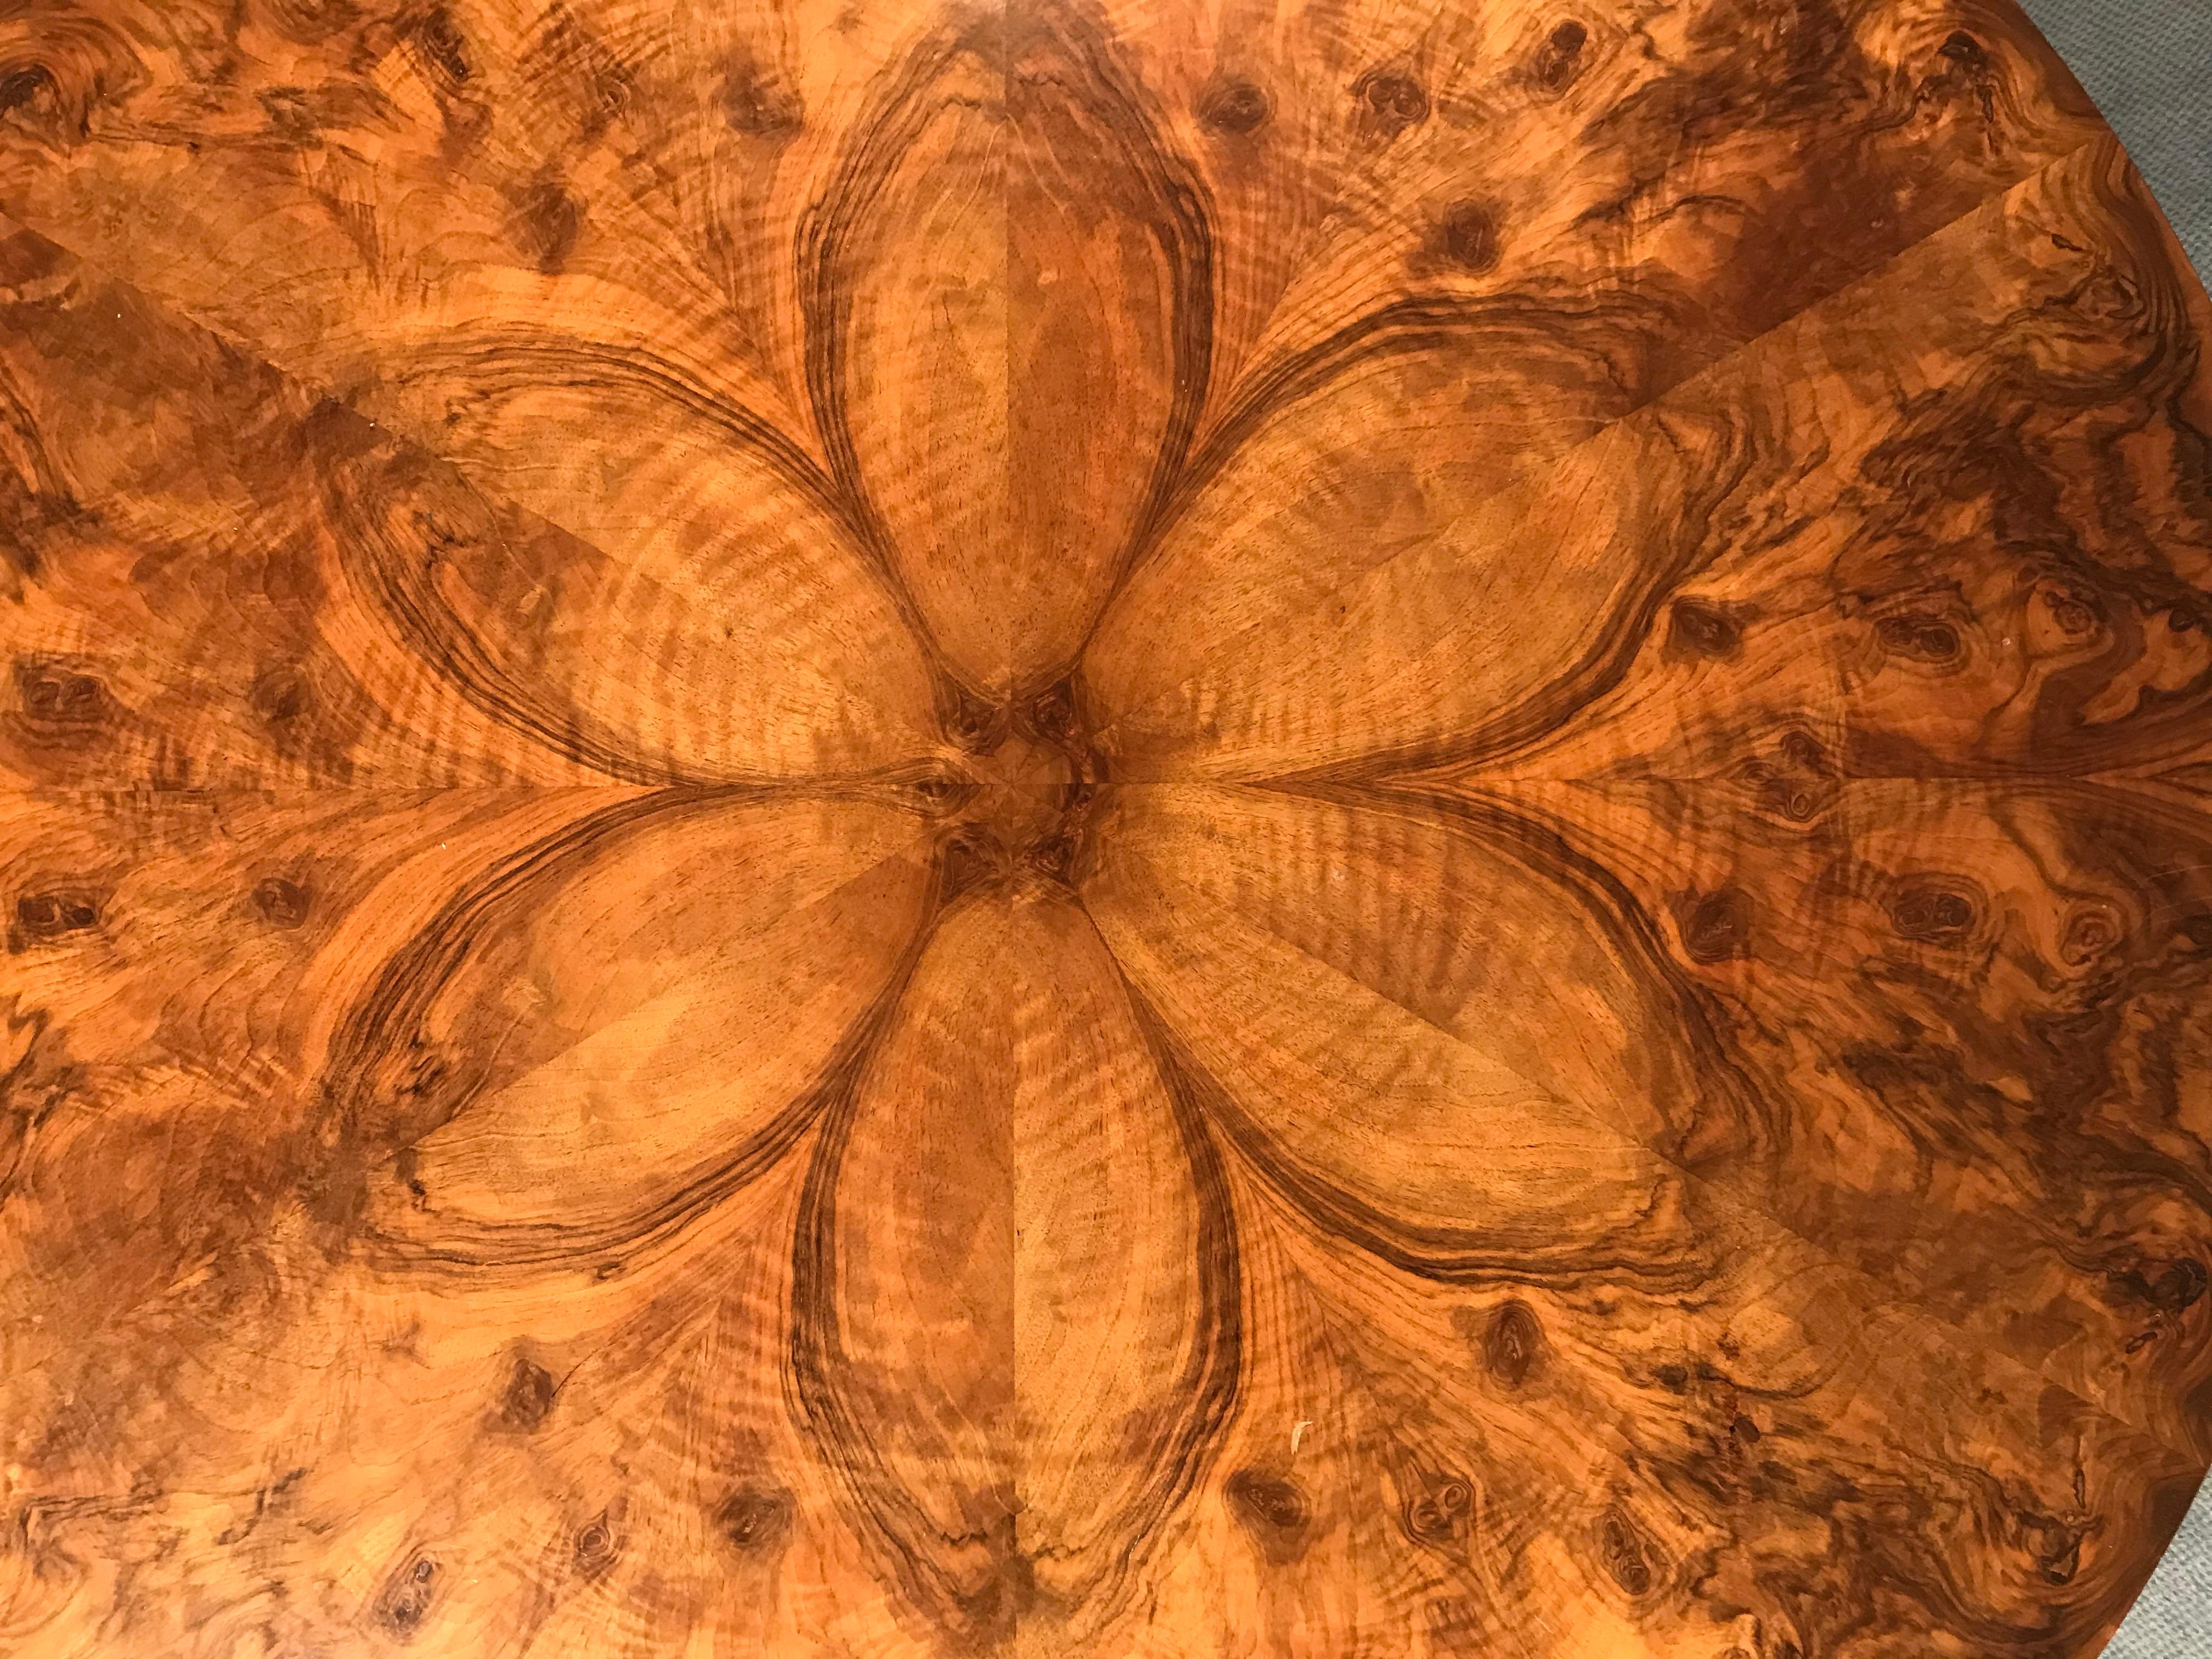 Beautiful Biedermeier table, South German 1820-1830, walnut veneer. The top with an exquisite walnut root veneer pattern. Great size for a dining or center table. It will be shipped from Germany. Shipping costs to Boston are included.